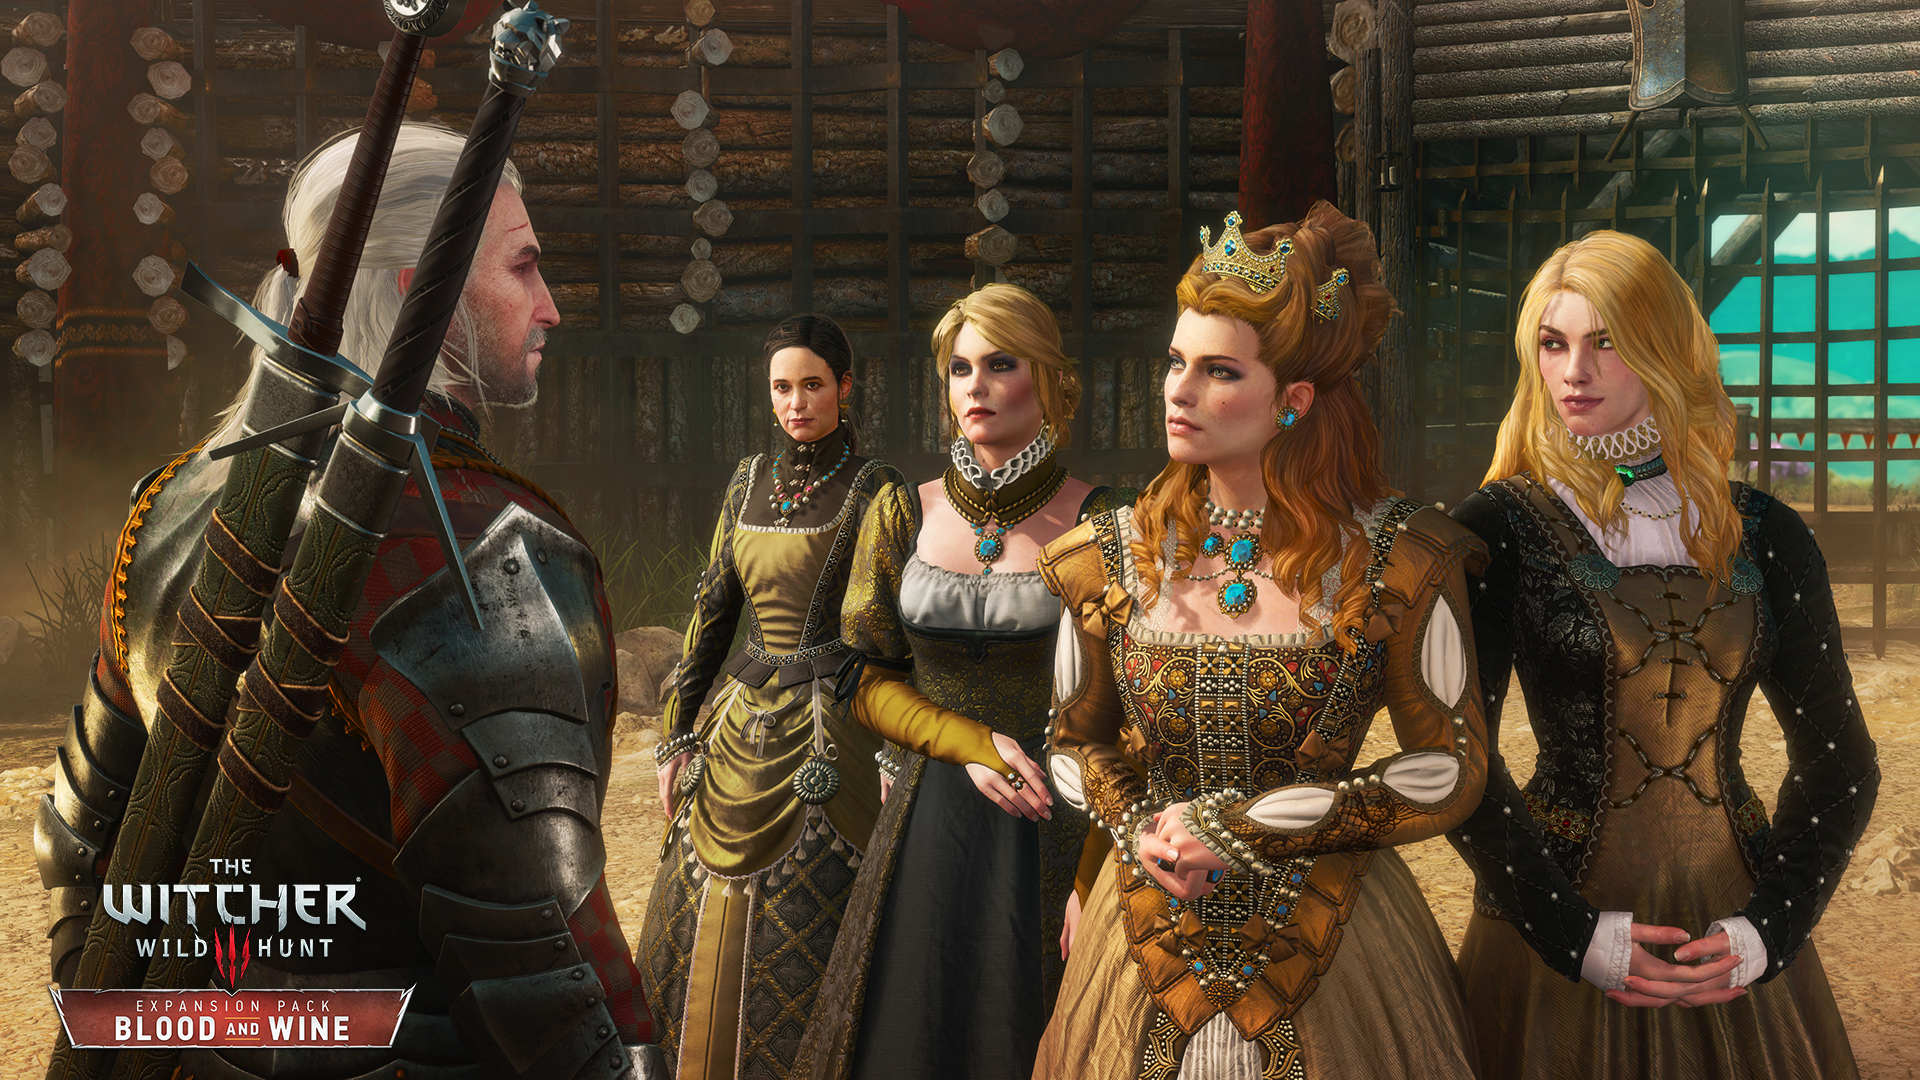 The Witcher 3 Wild Hunt Geralt Of Rivia The Witcher The Witcher 3 Wild Hunt Blood And Wine Anna Henr 1920x1080